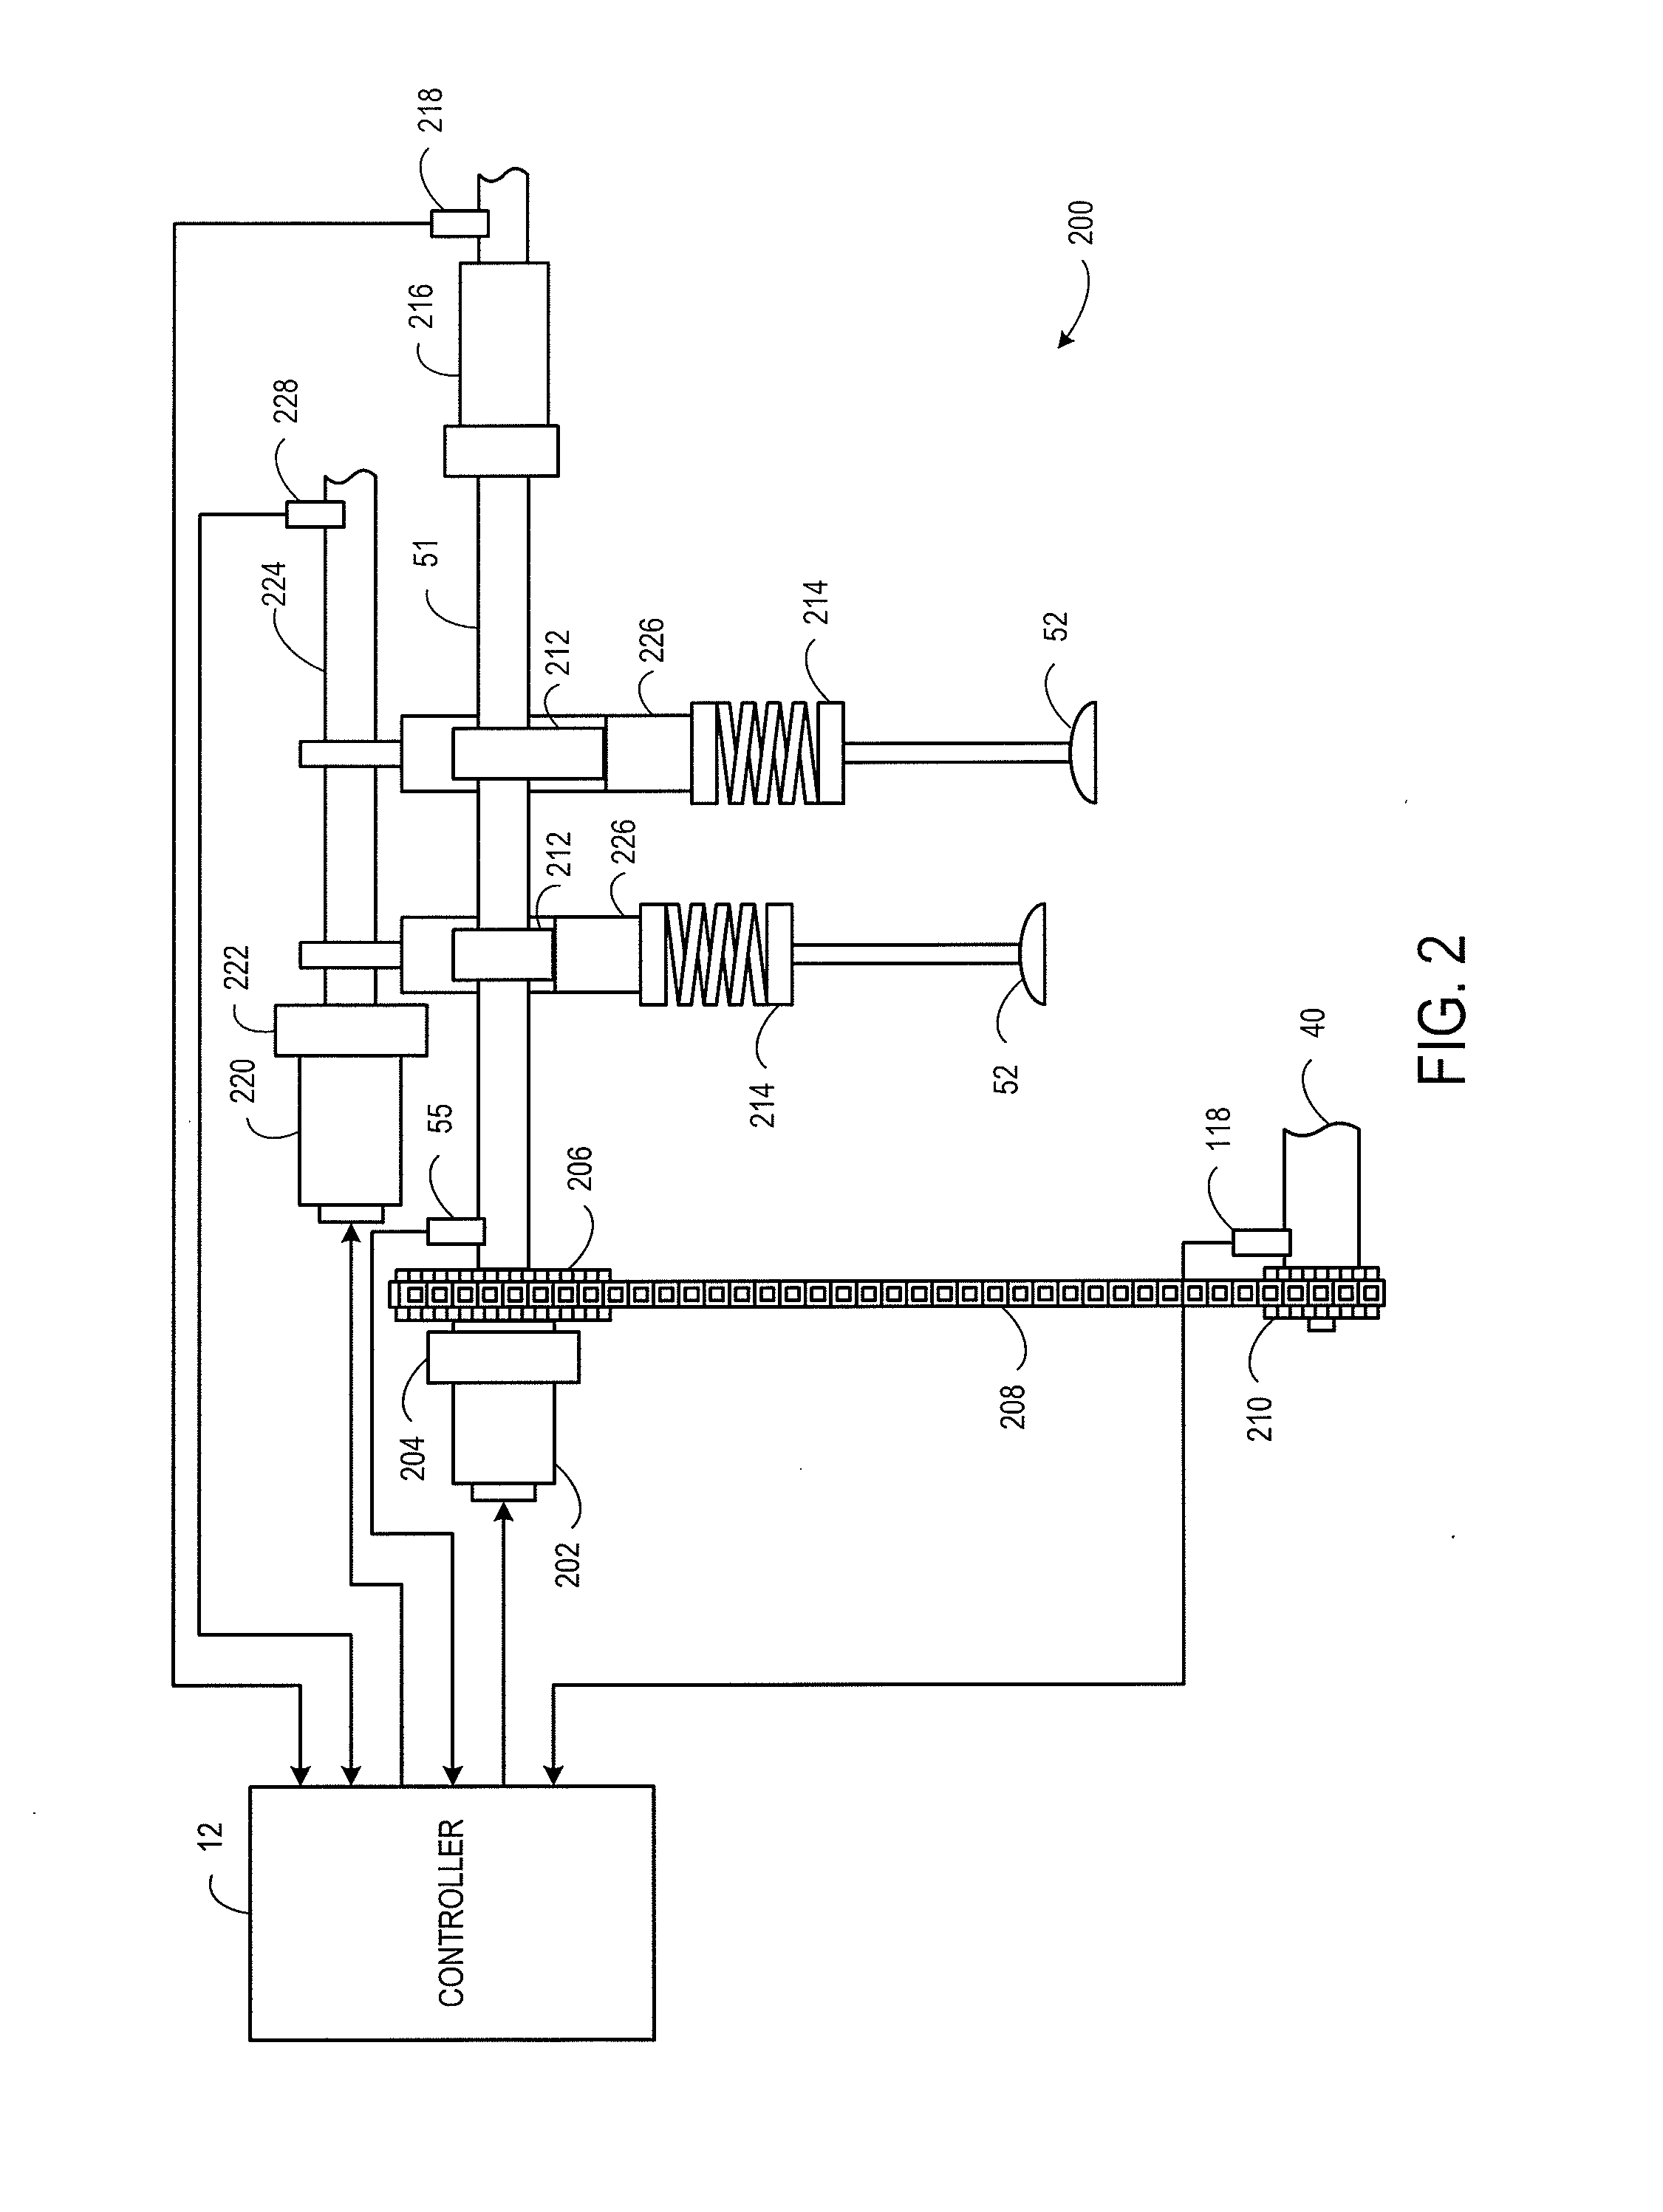 Feed Forward Control for Electric Variable Valve Operation